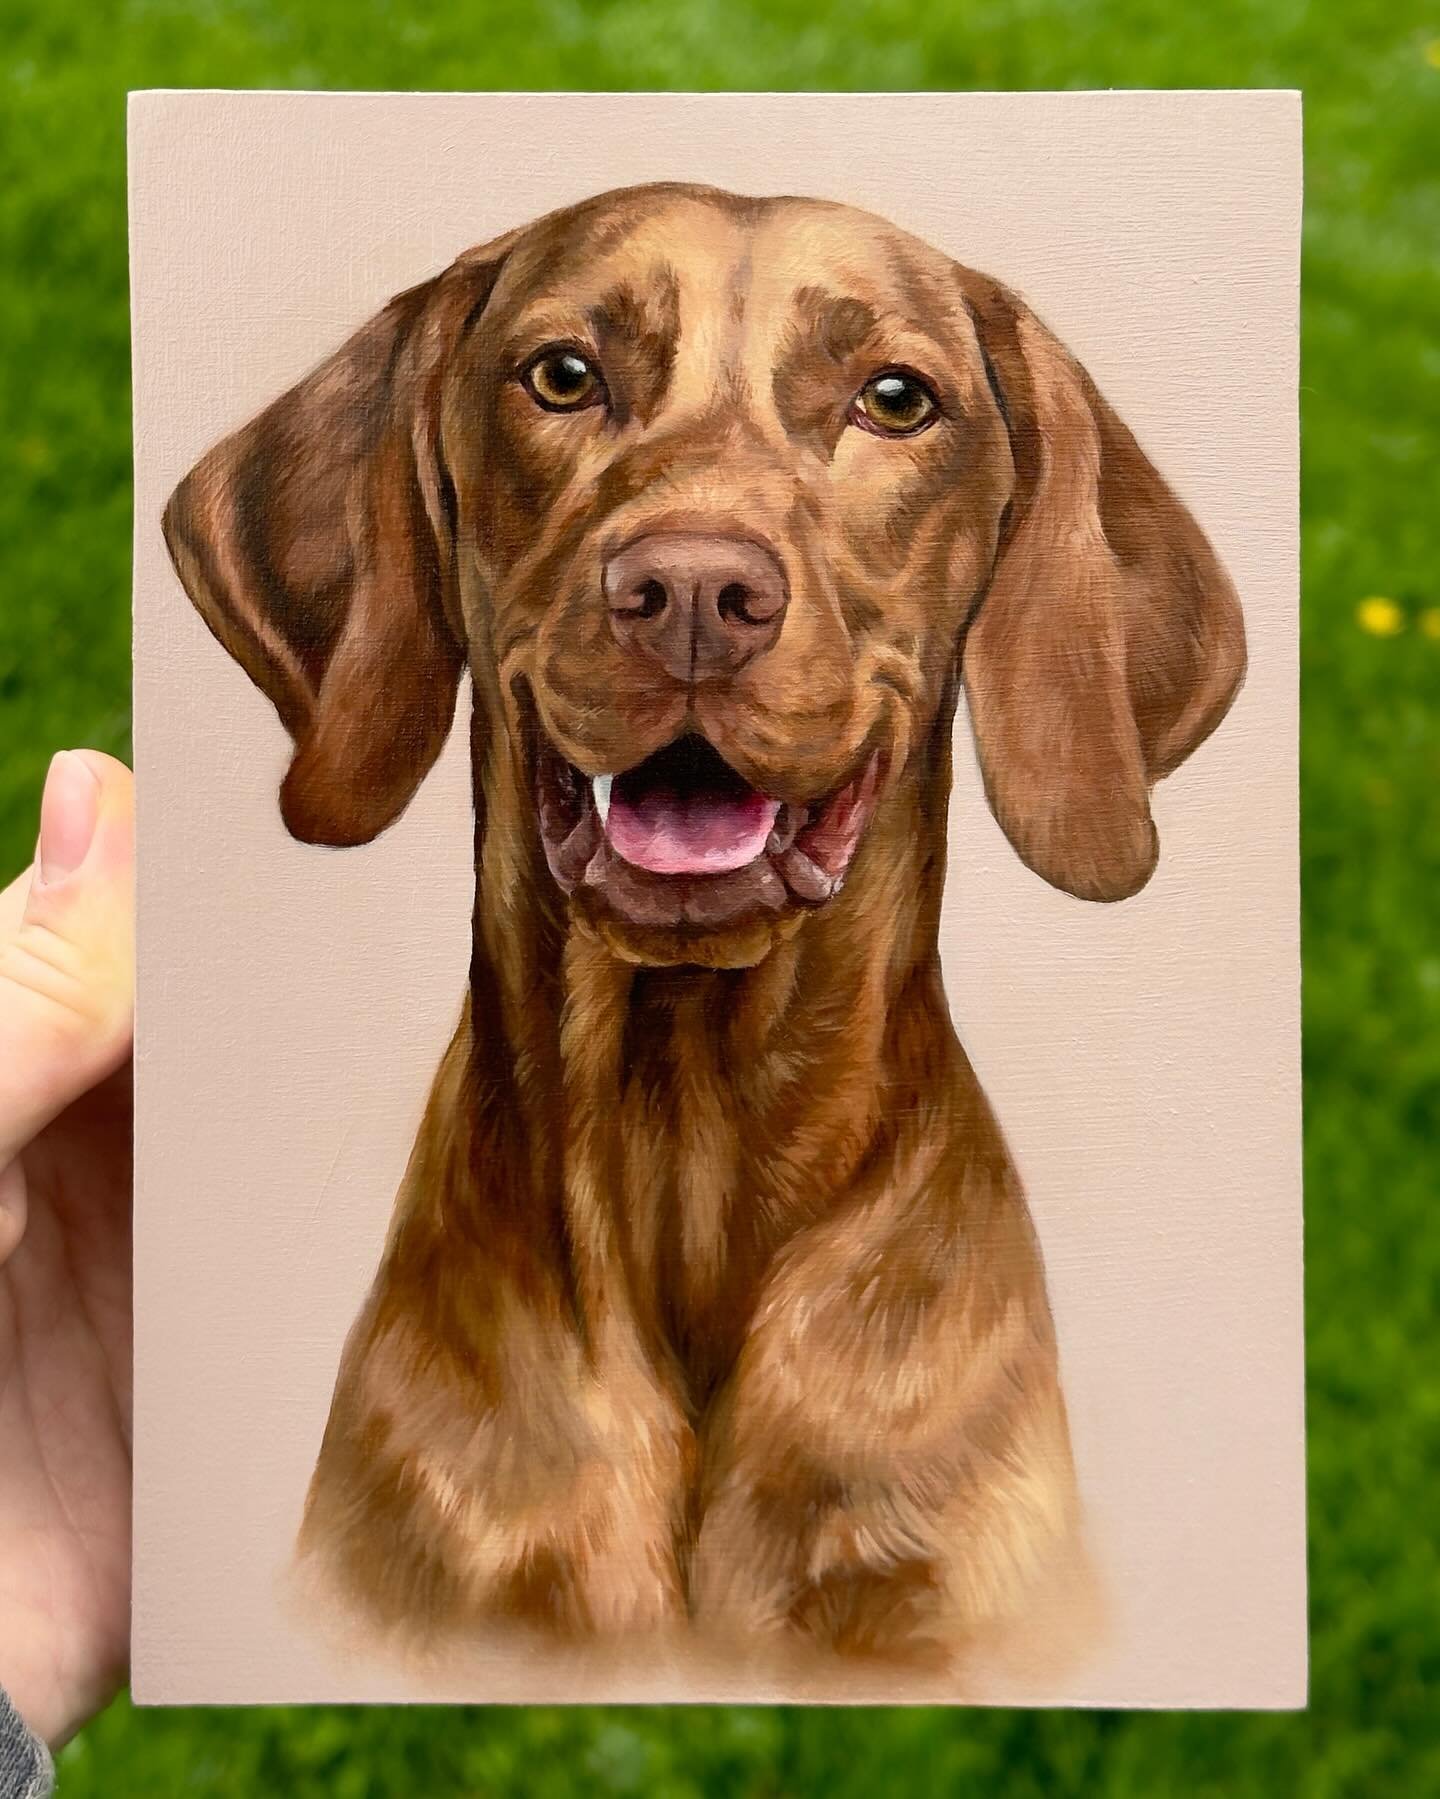 My completed painting of a very happy Vizsla &hearts;️ 7&rdquo;x5&rdquo;, oil on wooden panel. Will be for sale&mdash; stay tuned.
-
-
-
#vizslas #vizslalovers #oilonpanel #dogartist #dogpainting #dogportraitartist #vizsladog